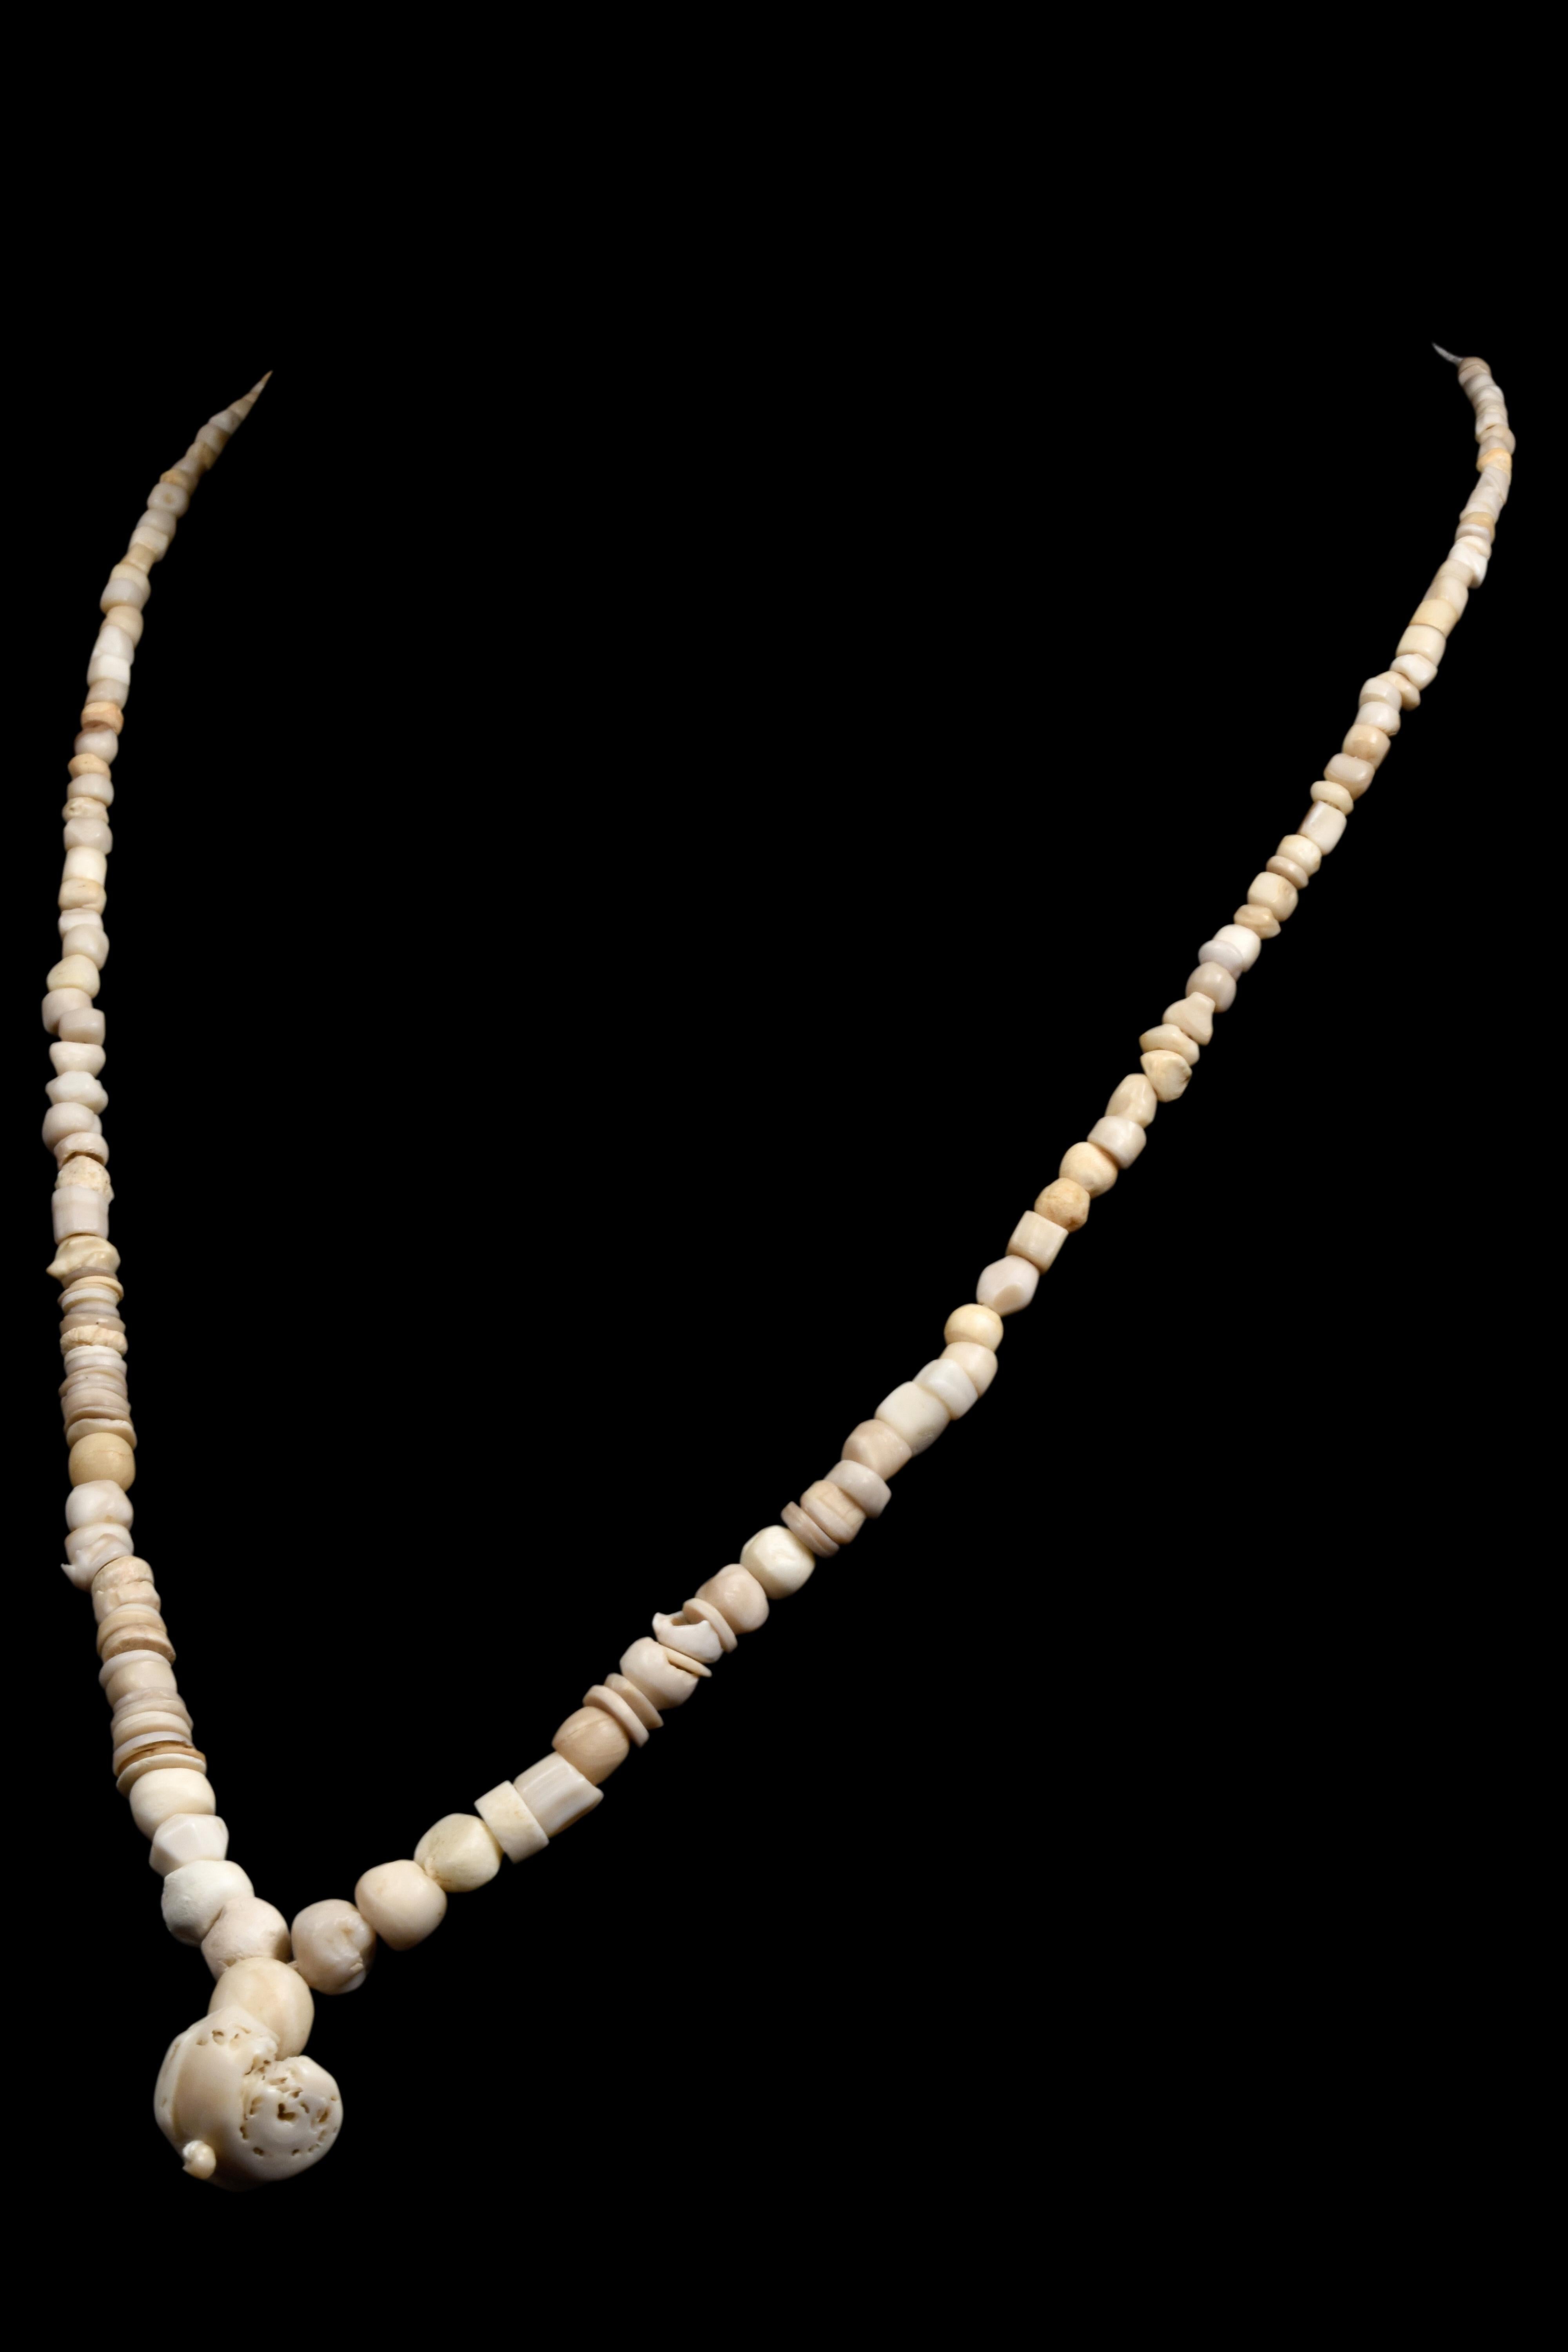 A restrung Roman stone necklace with cream and beige beads, featuring a central pendant comprised of a large, perforated stone. Roman stone beads varied in material and were valued for decoration and status.

Size: L: 220/440mm / W: 5mm ;